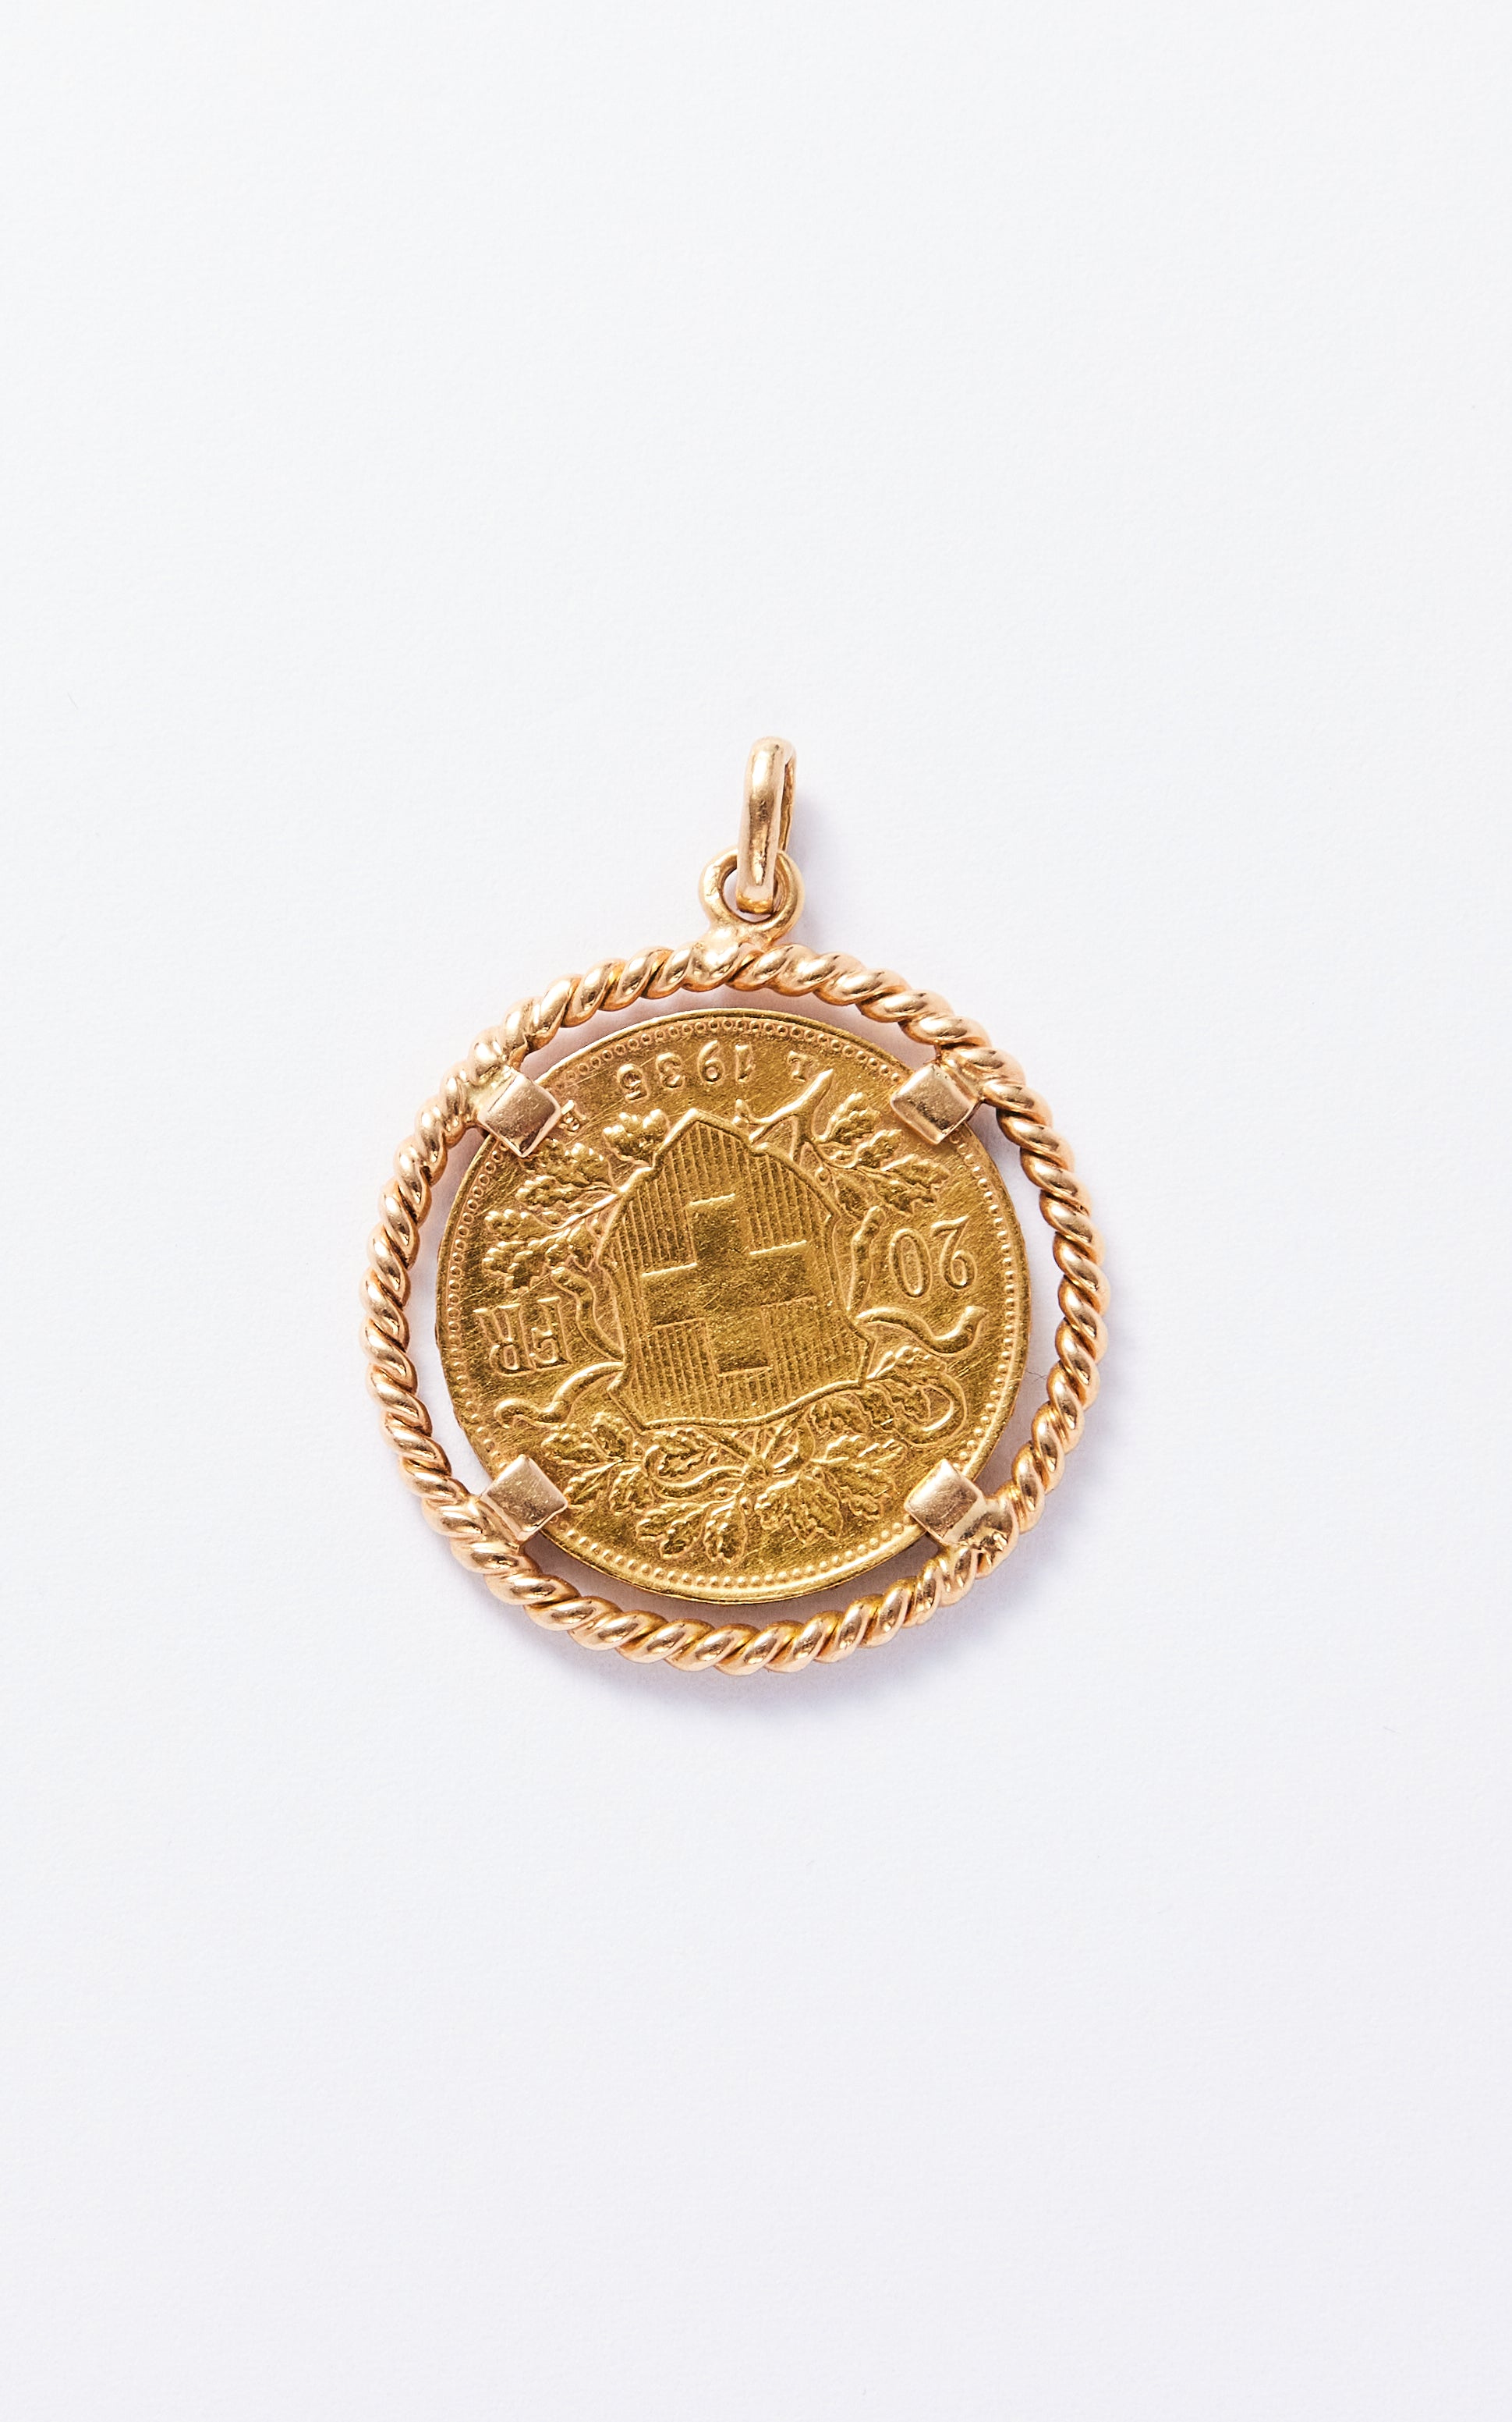 Swiss Coin set in 18ct Gold